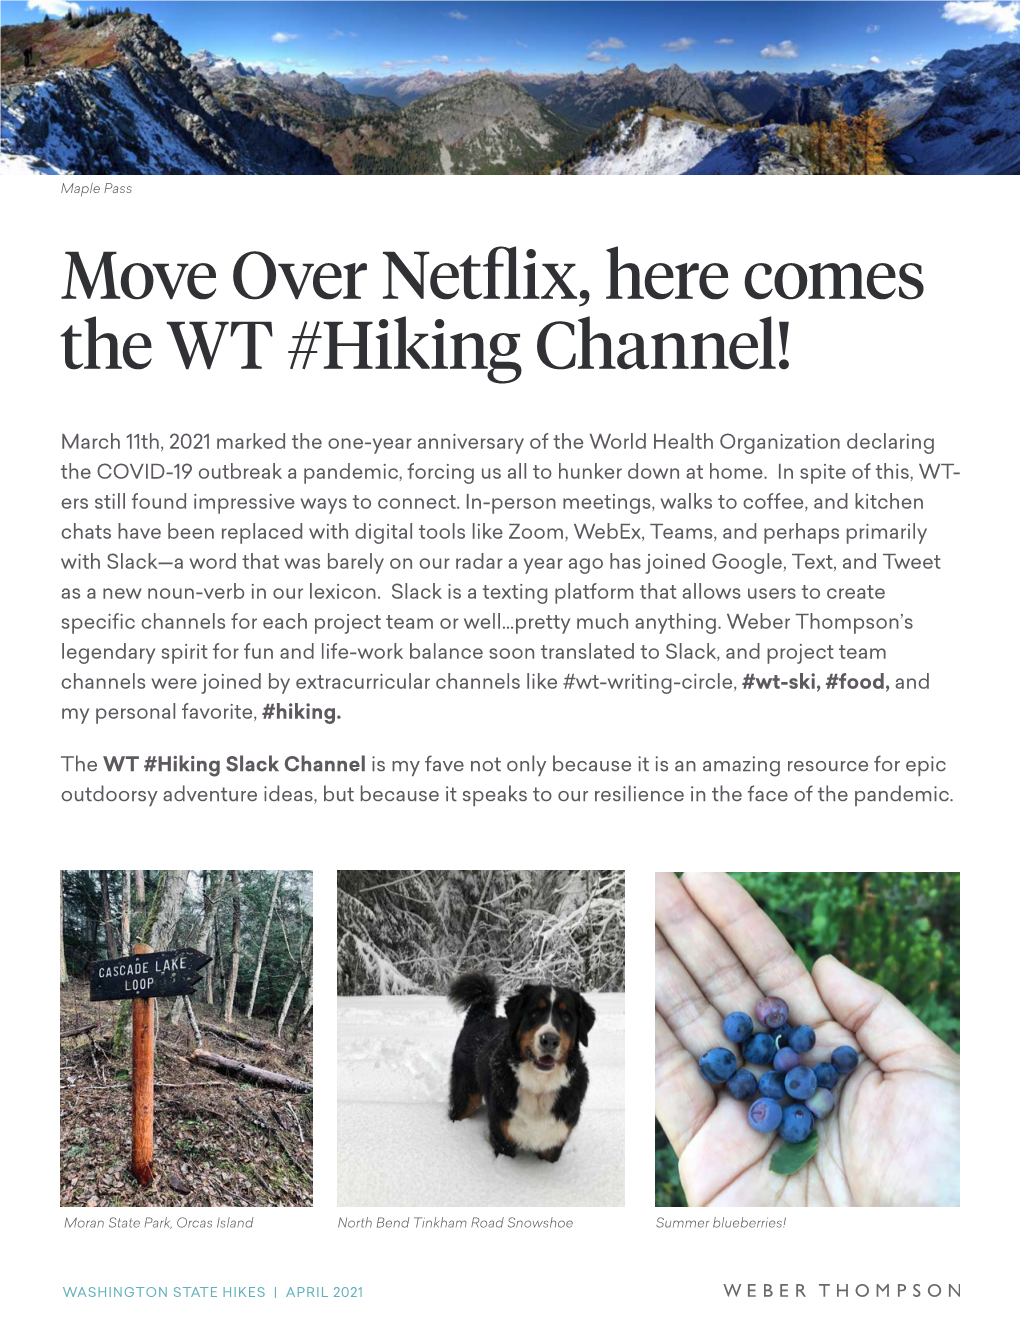 Move Over Netflix, Here Comes the WT #Hiking Channel!